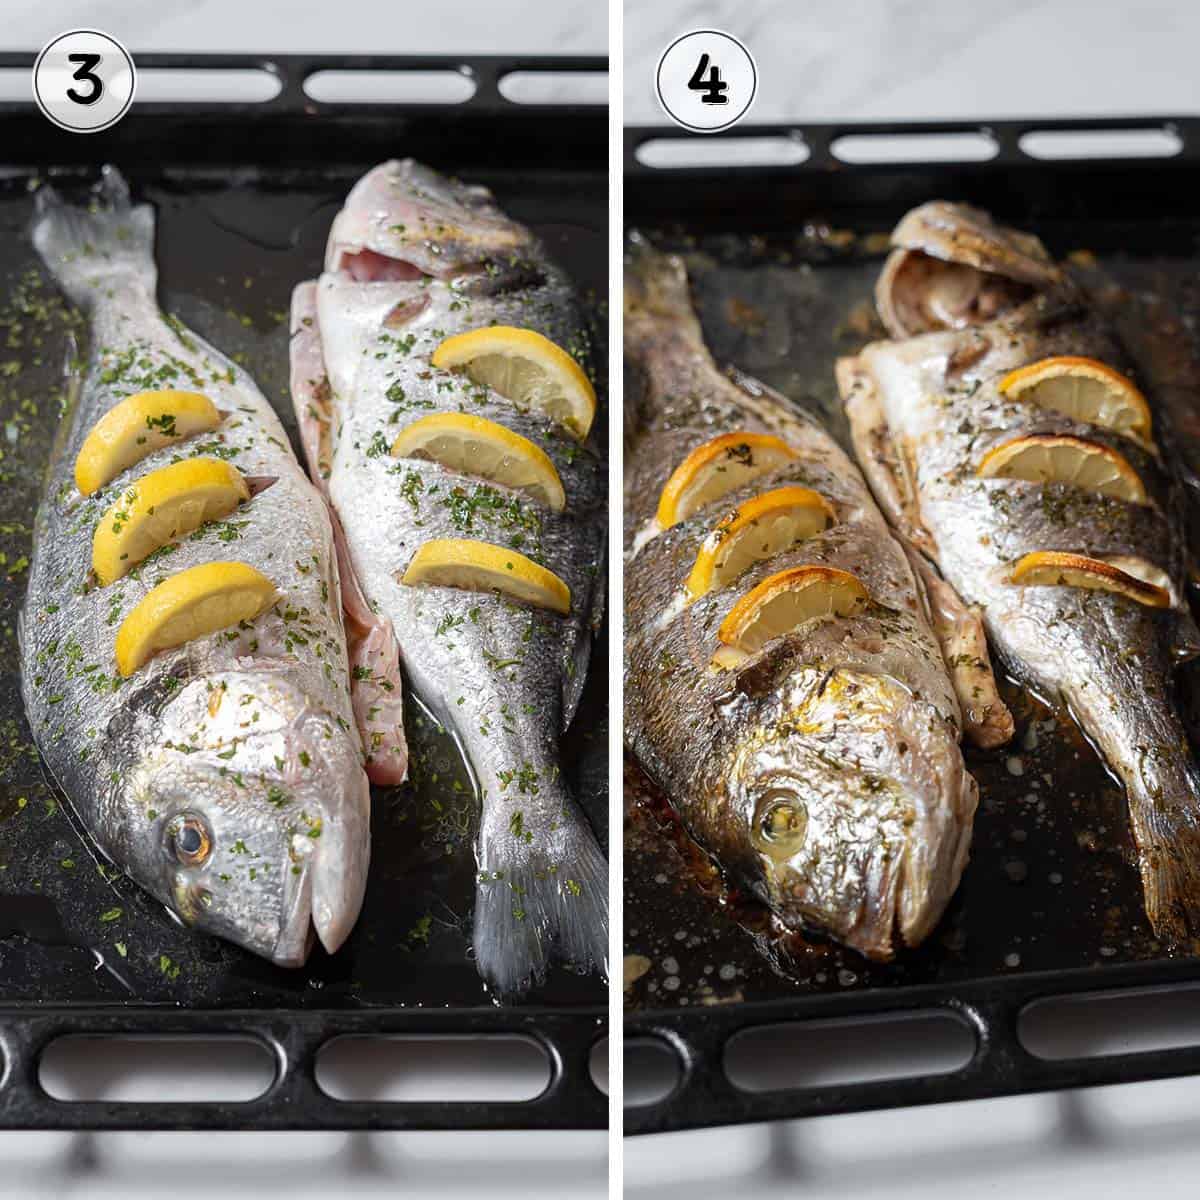 before and after baking the bream.